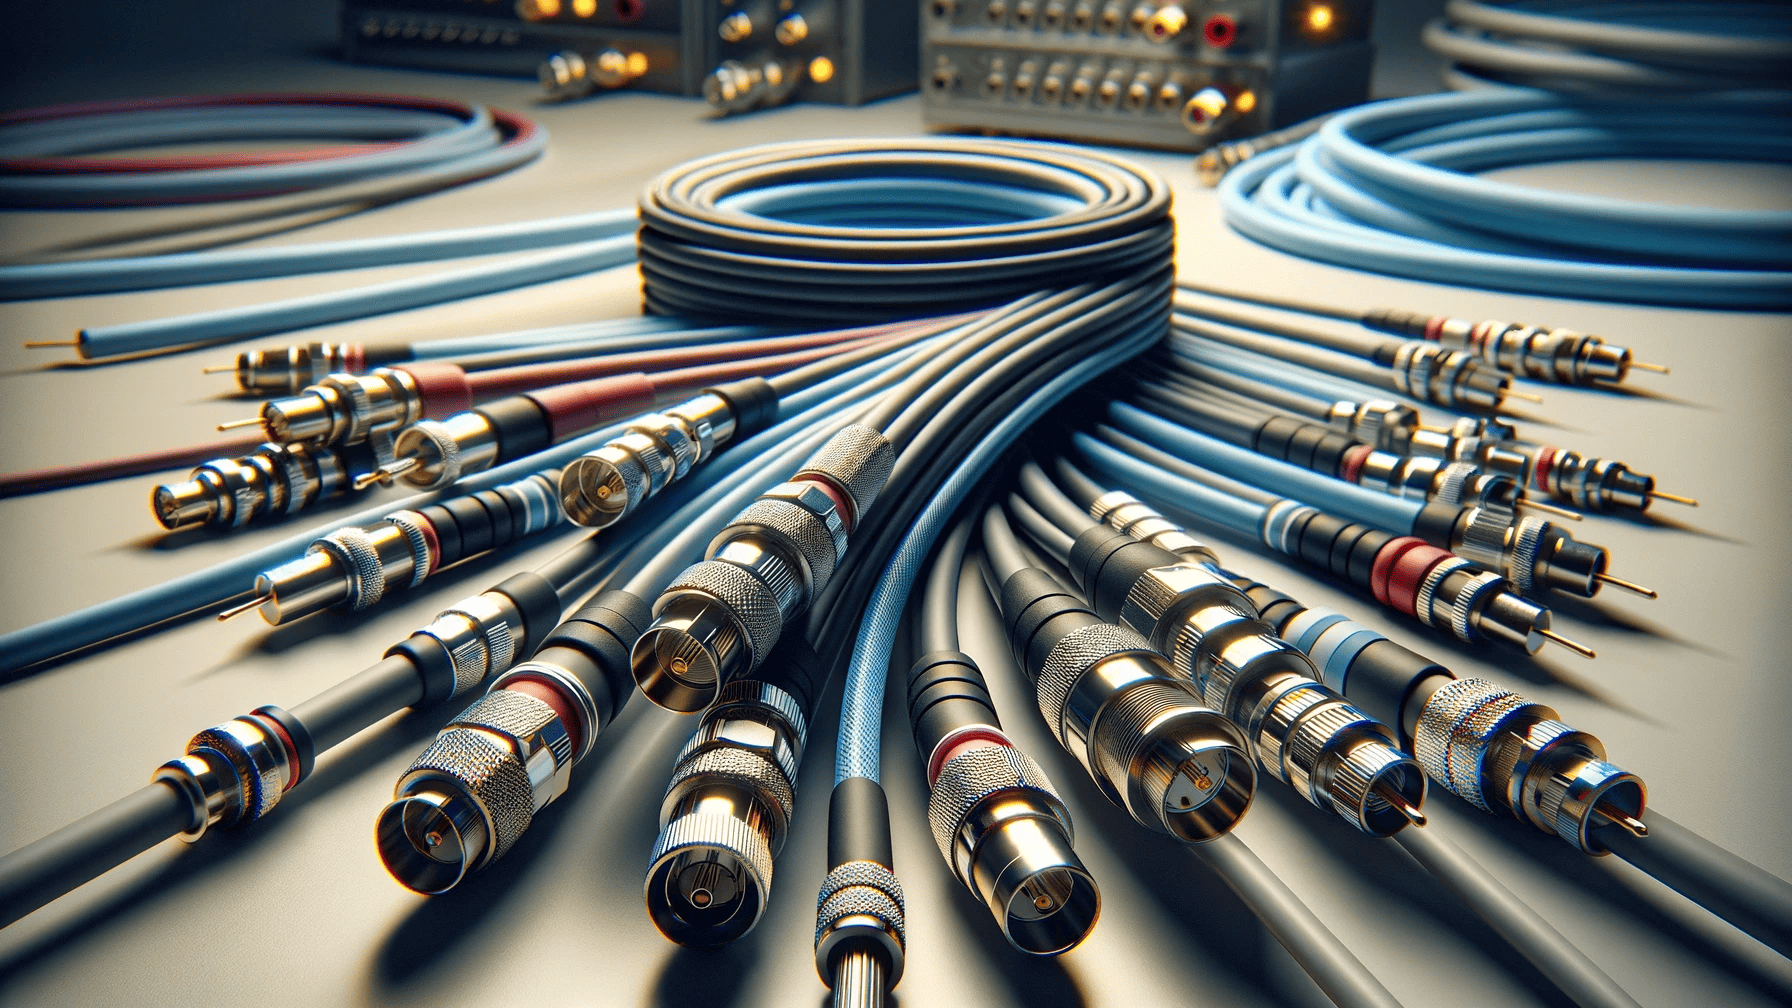 Illustration of numerous coaxial cables splayed out in an arc